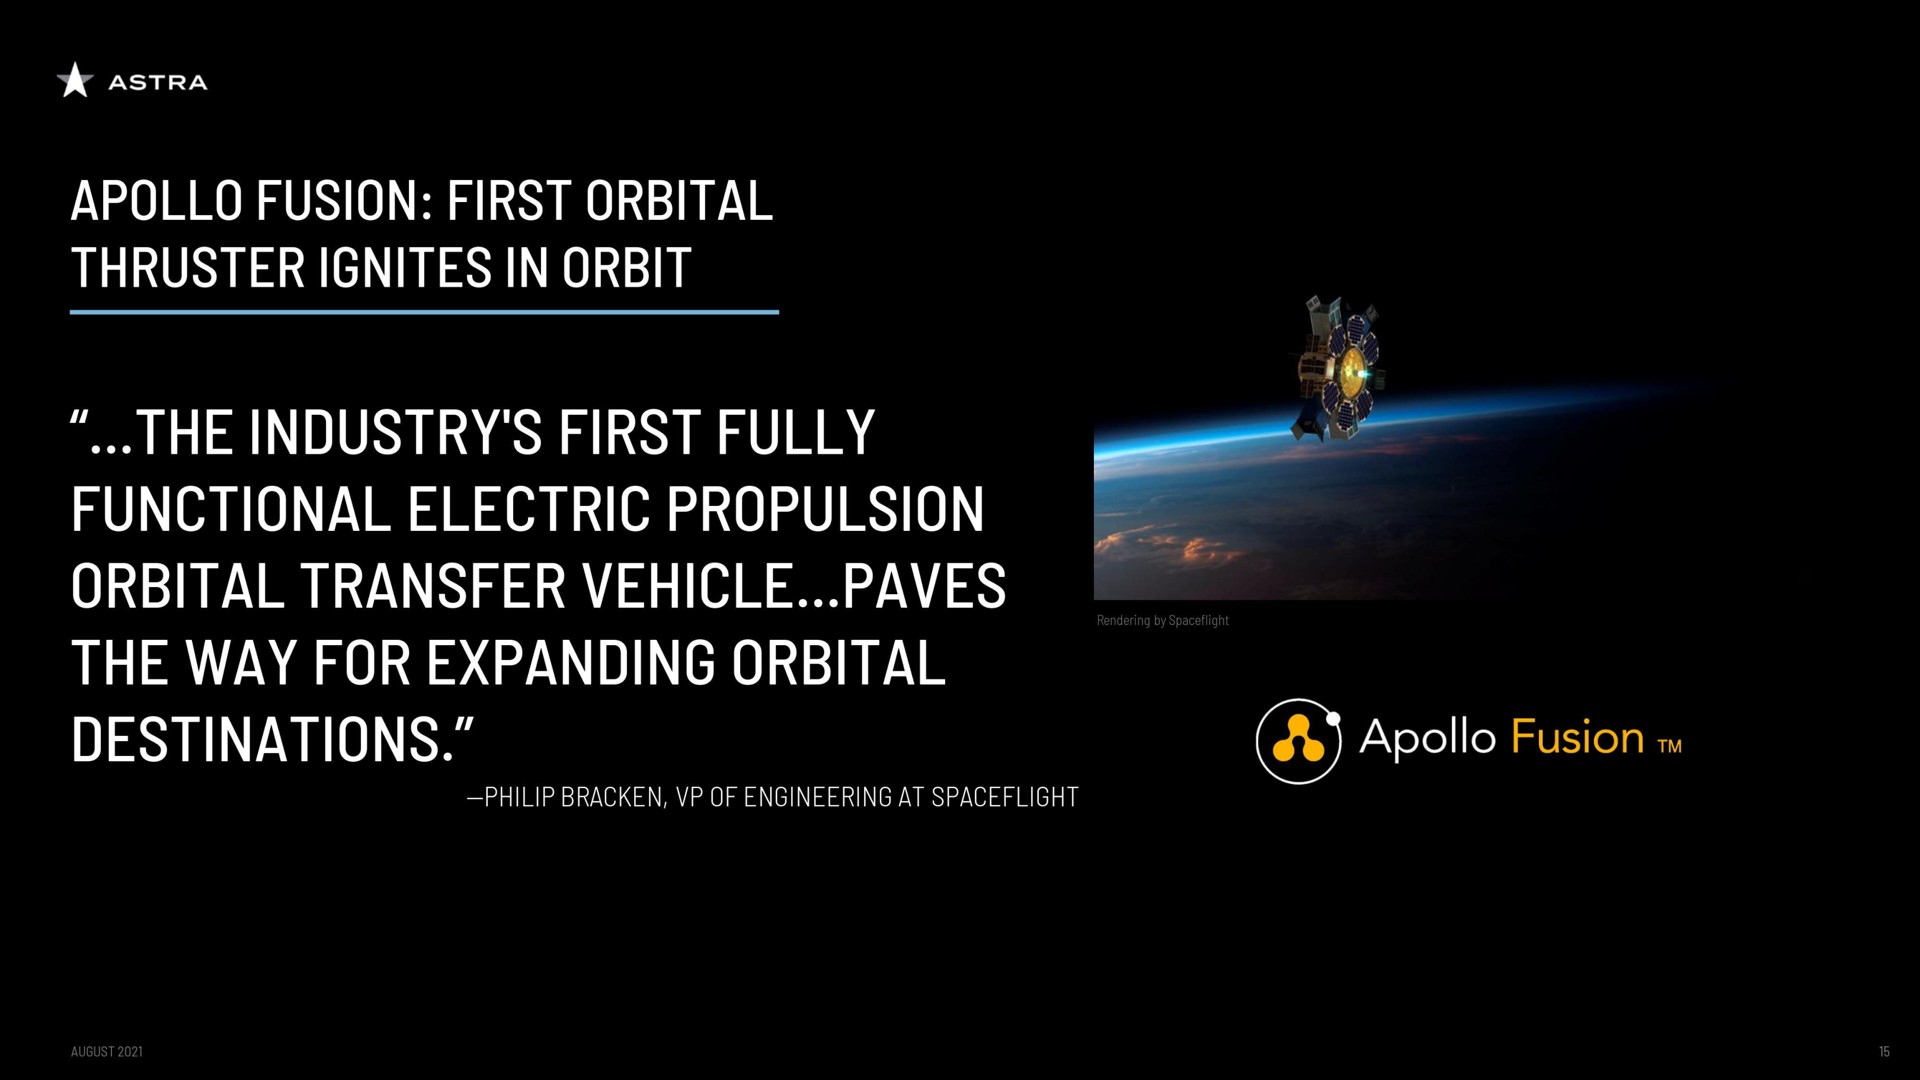 fusion first orbital ces me a sma us functional electric propulsion as the way for expanding orbital destinations | Astra